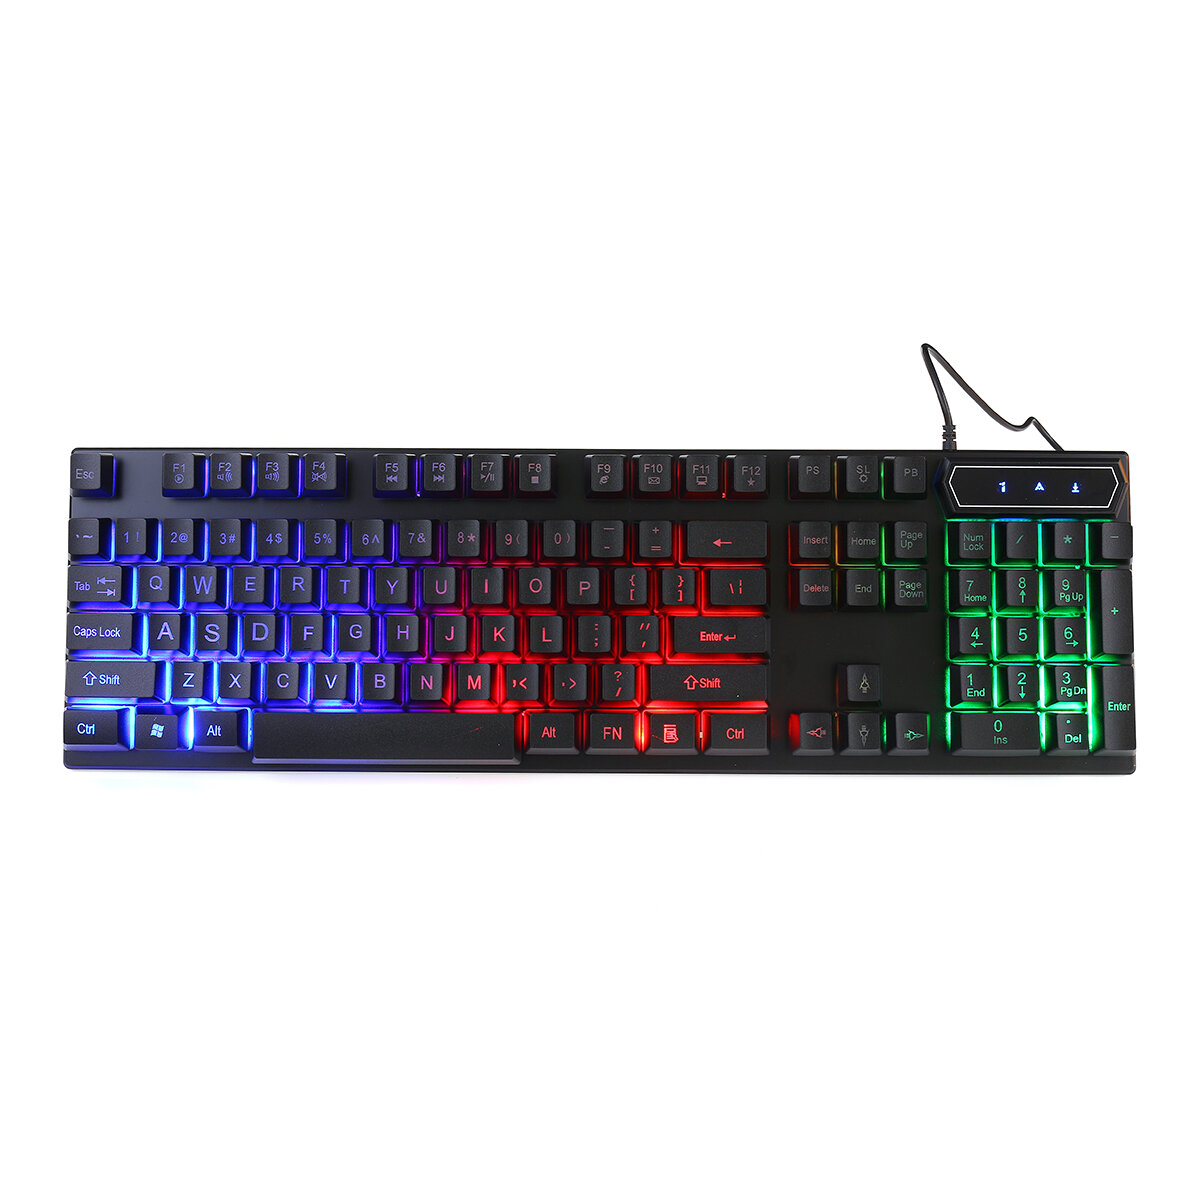 104 Keys Wired Gaming Keyboard USB Wired RGB Backlight Keyboard Waterproof for PC Computer Laptop